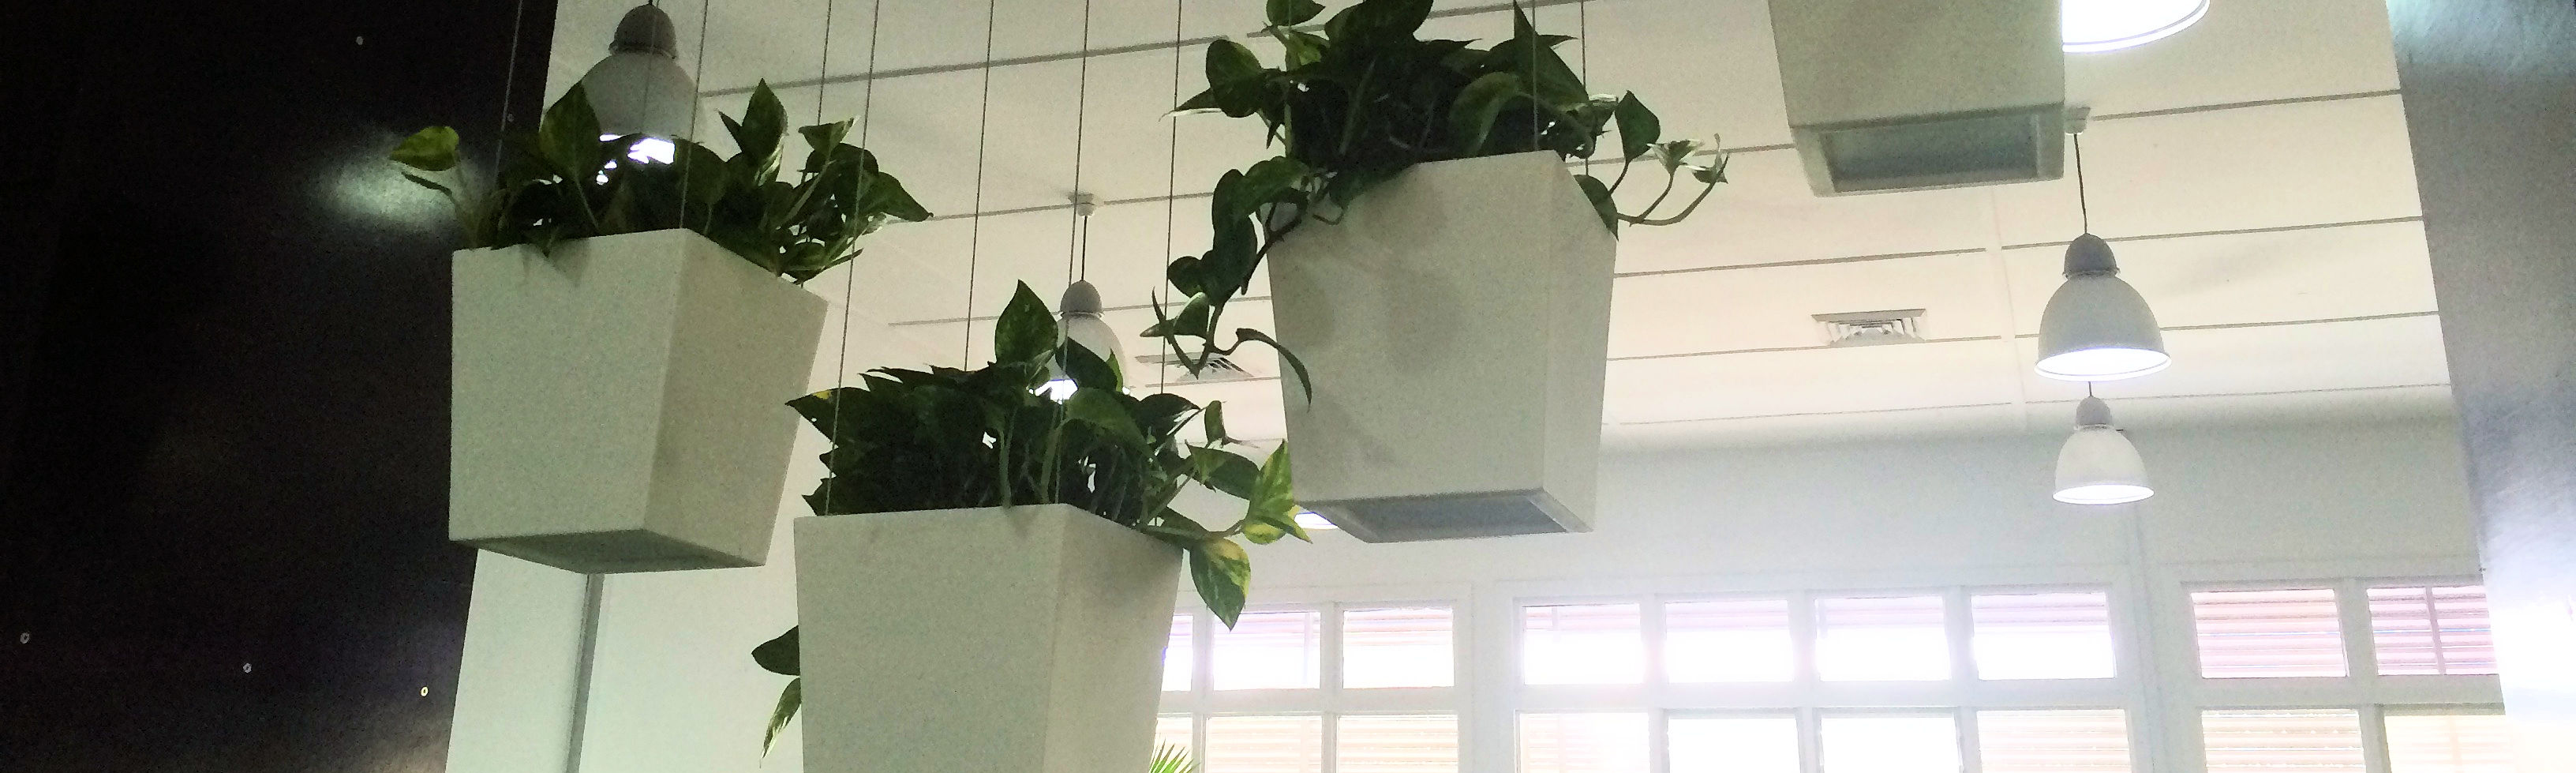 Showing four white Urban Desk planters hanging from the ceiling with trailing pothos.